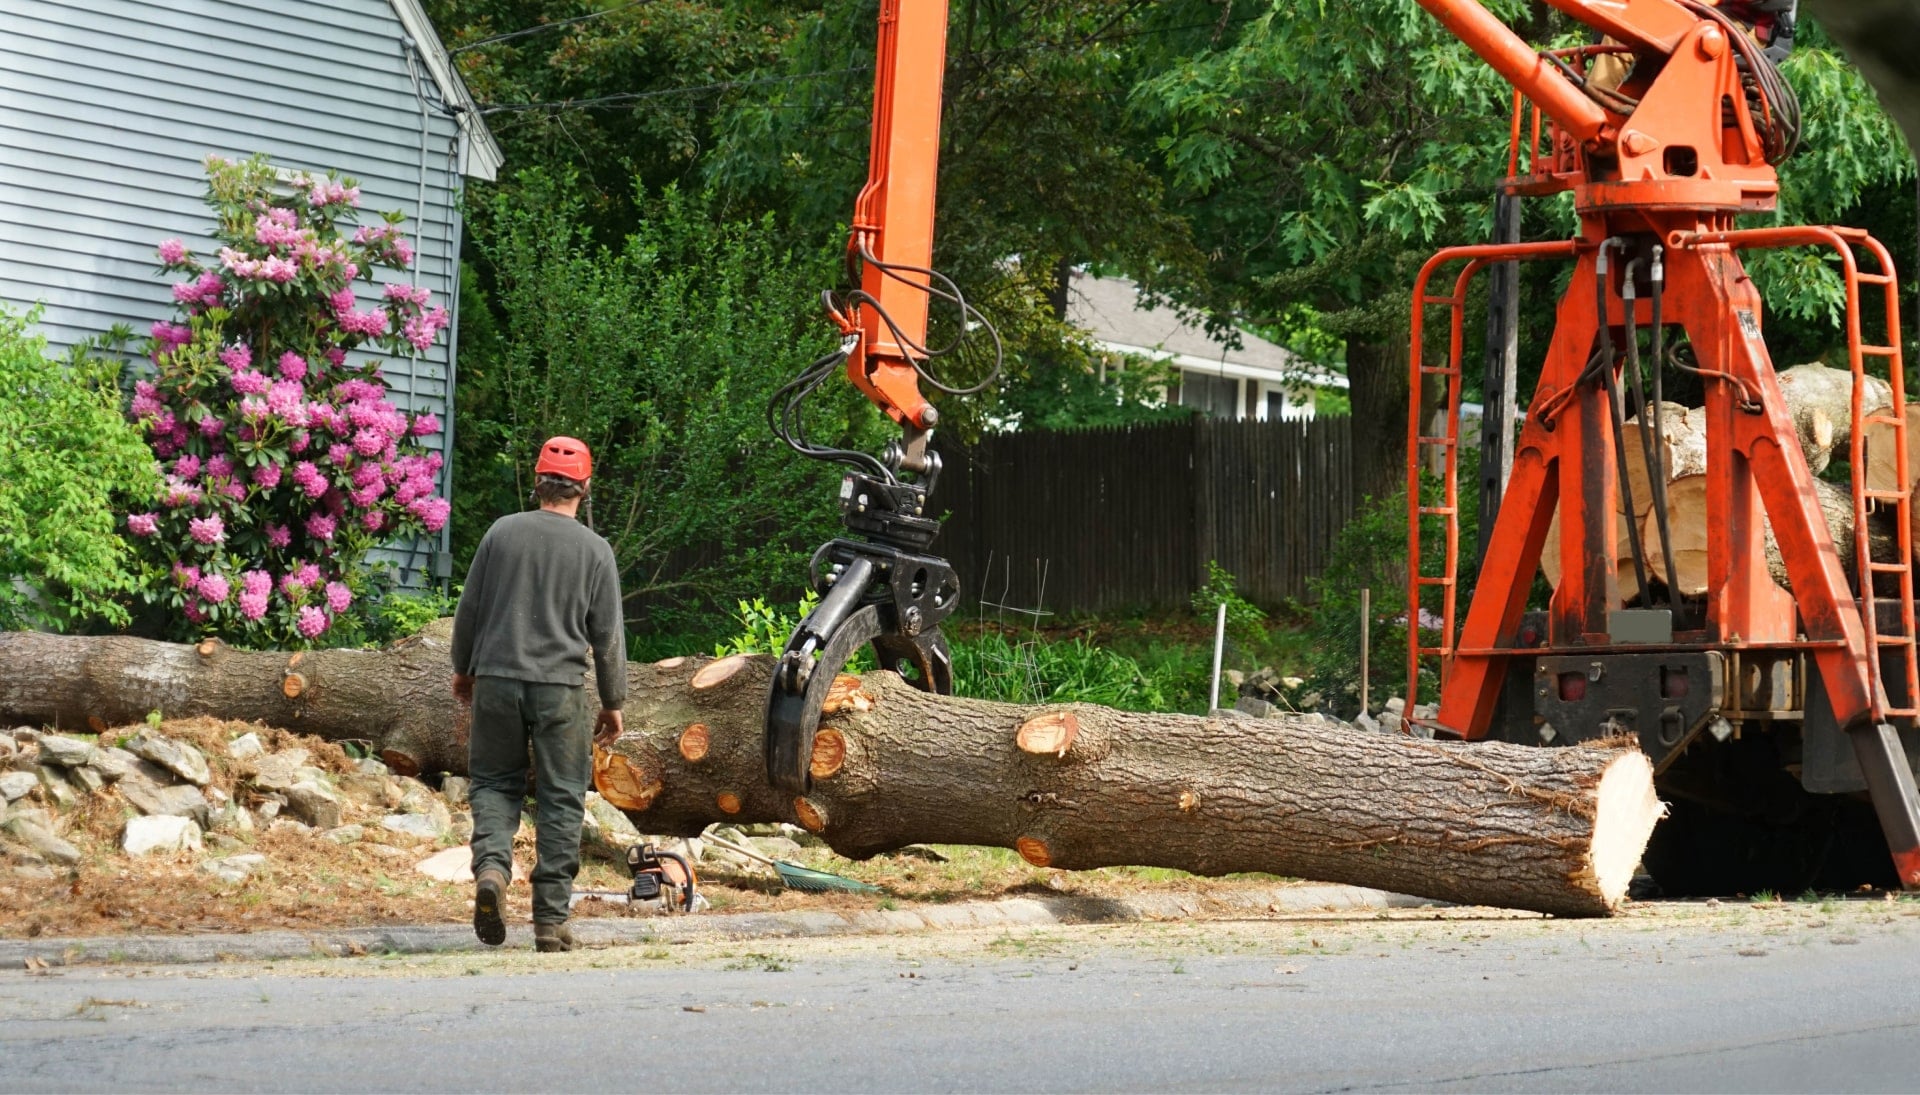 Local partner for Tree removal services in Lexington